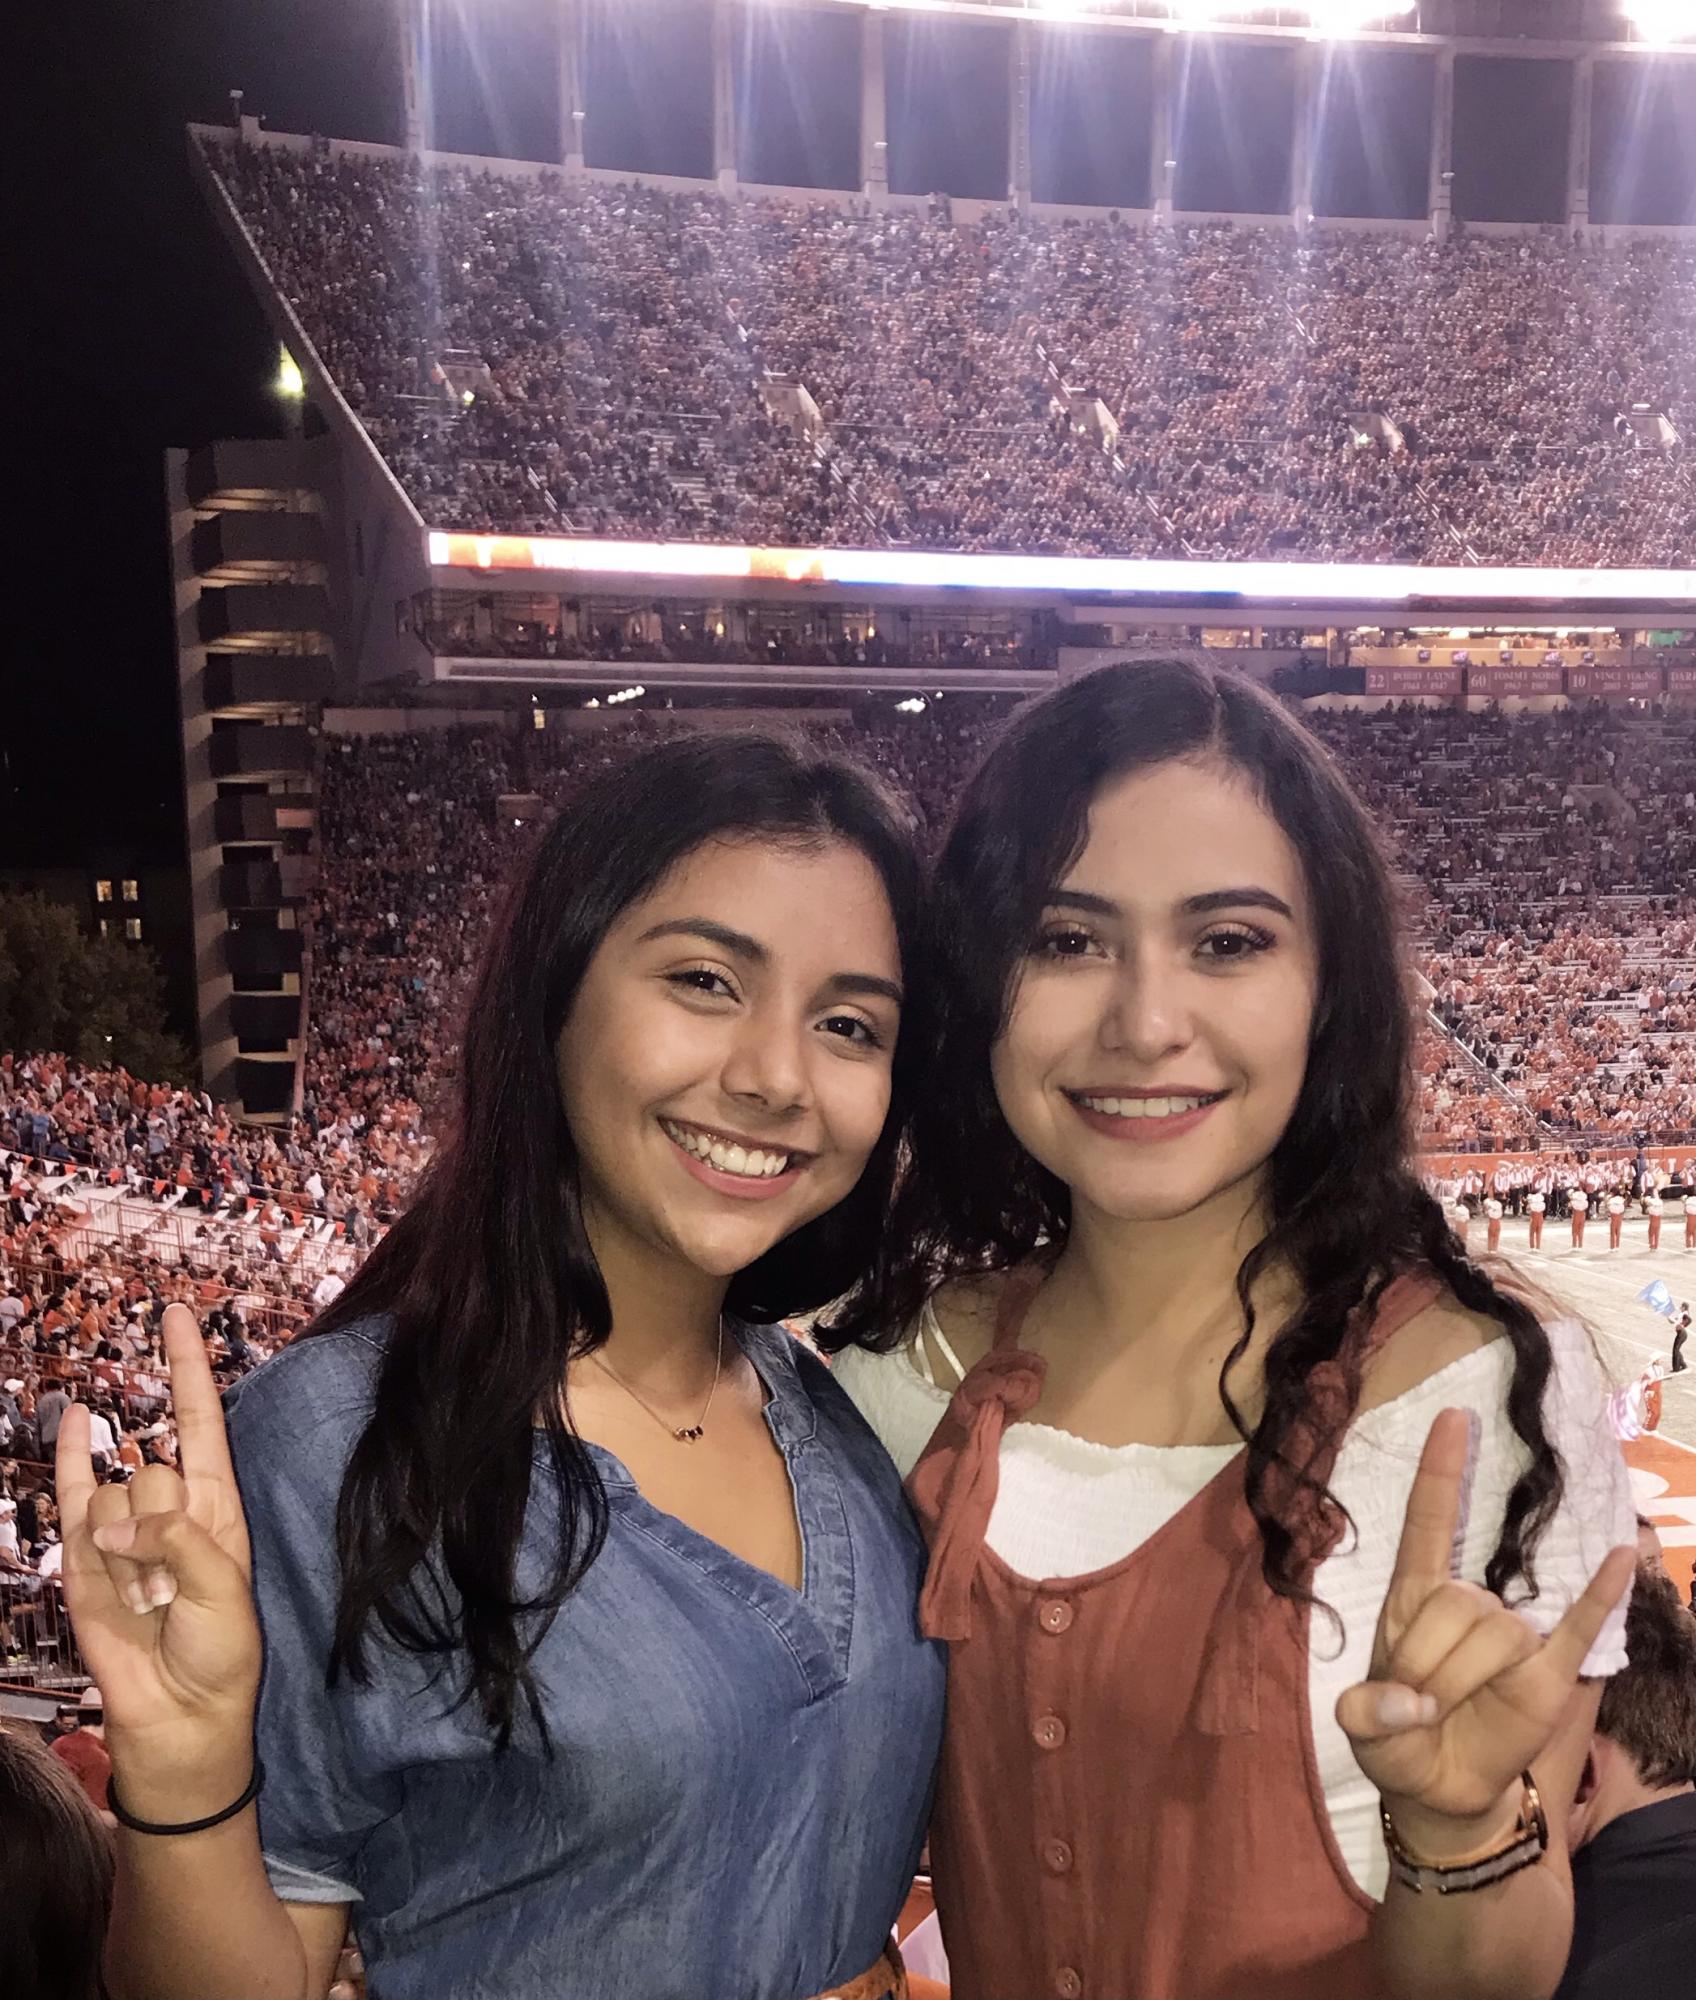 two women put up hand signs and smile in crowded stadium